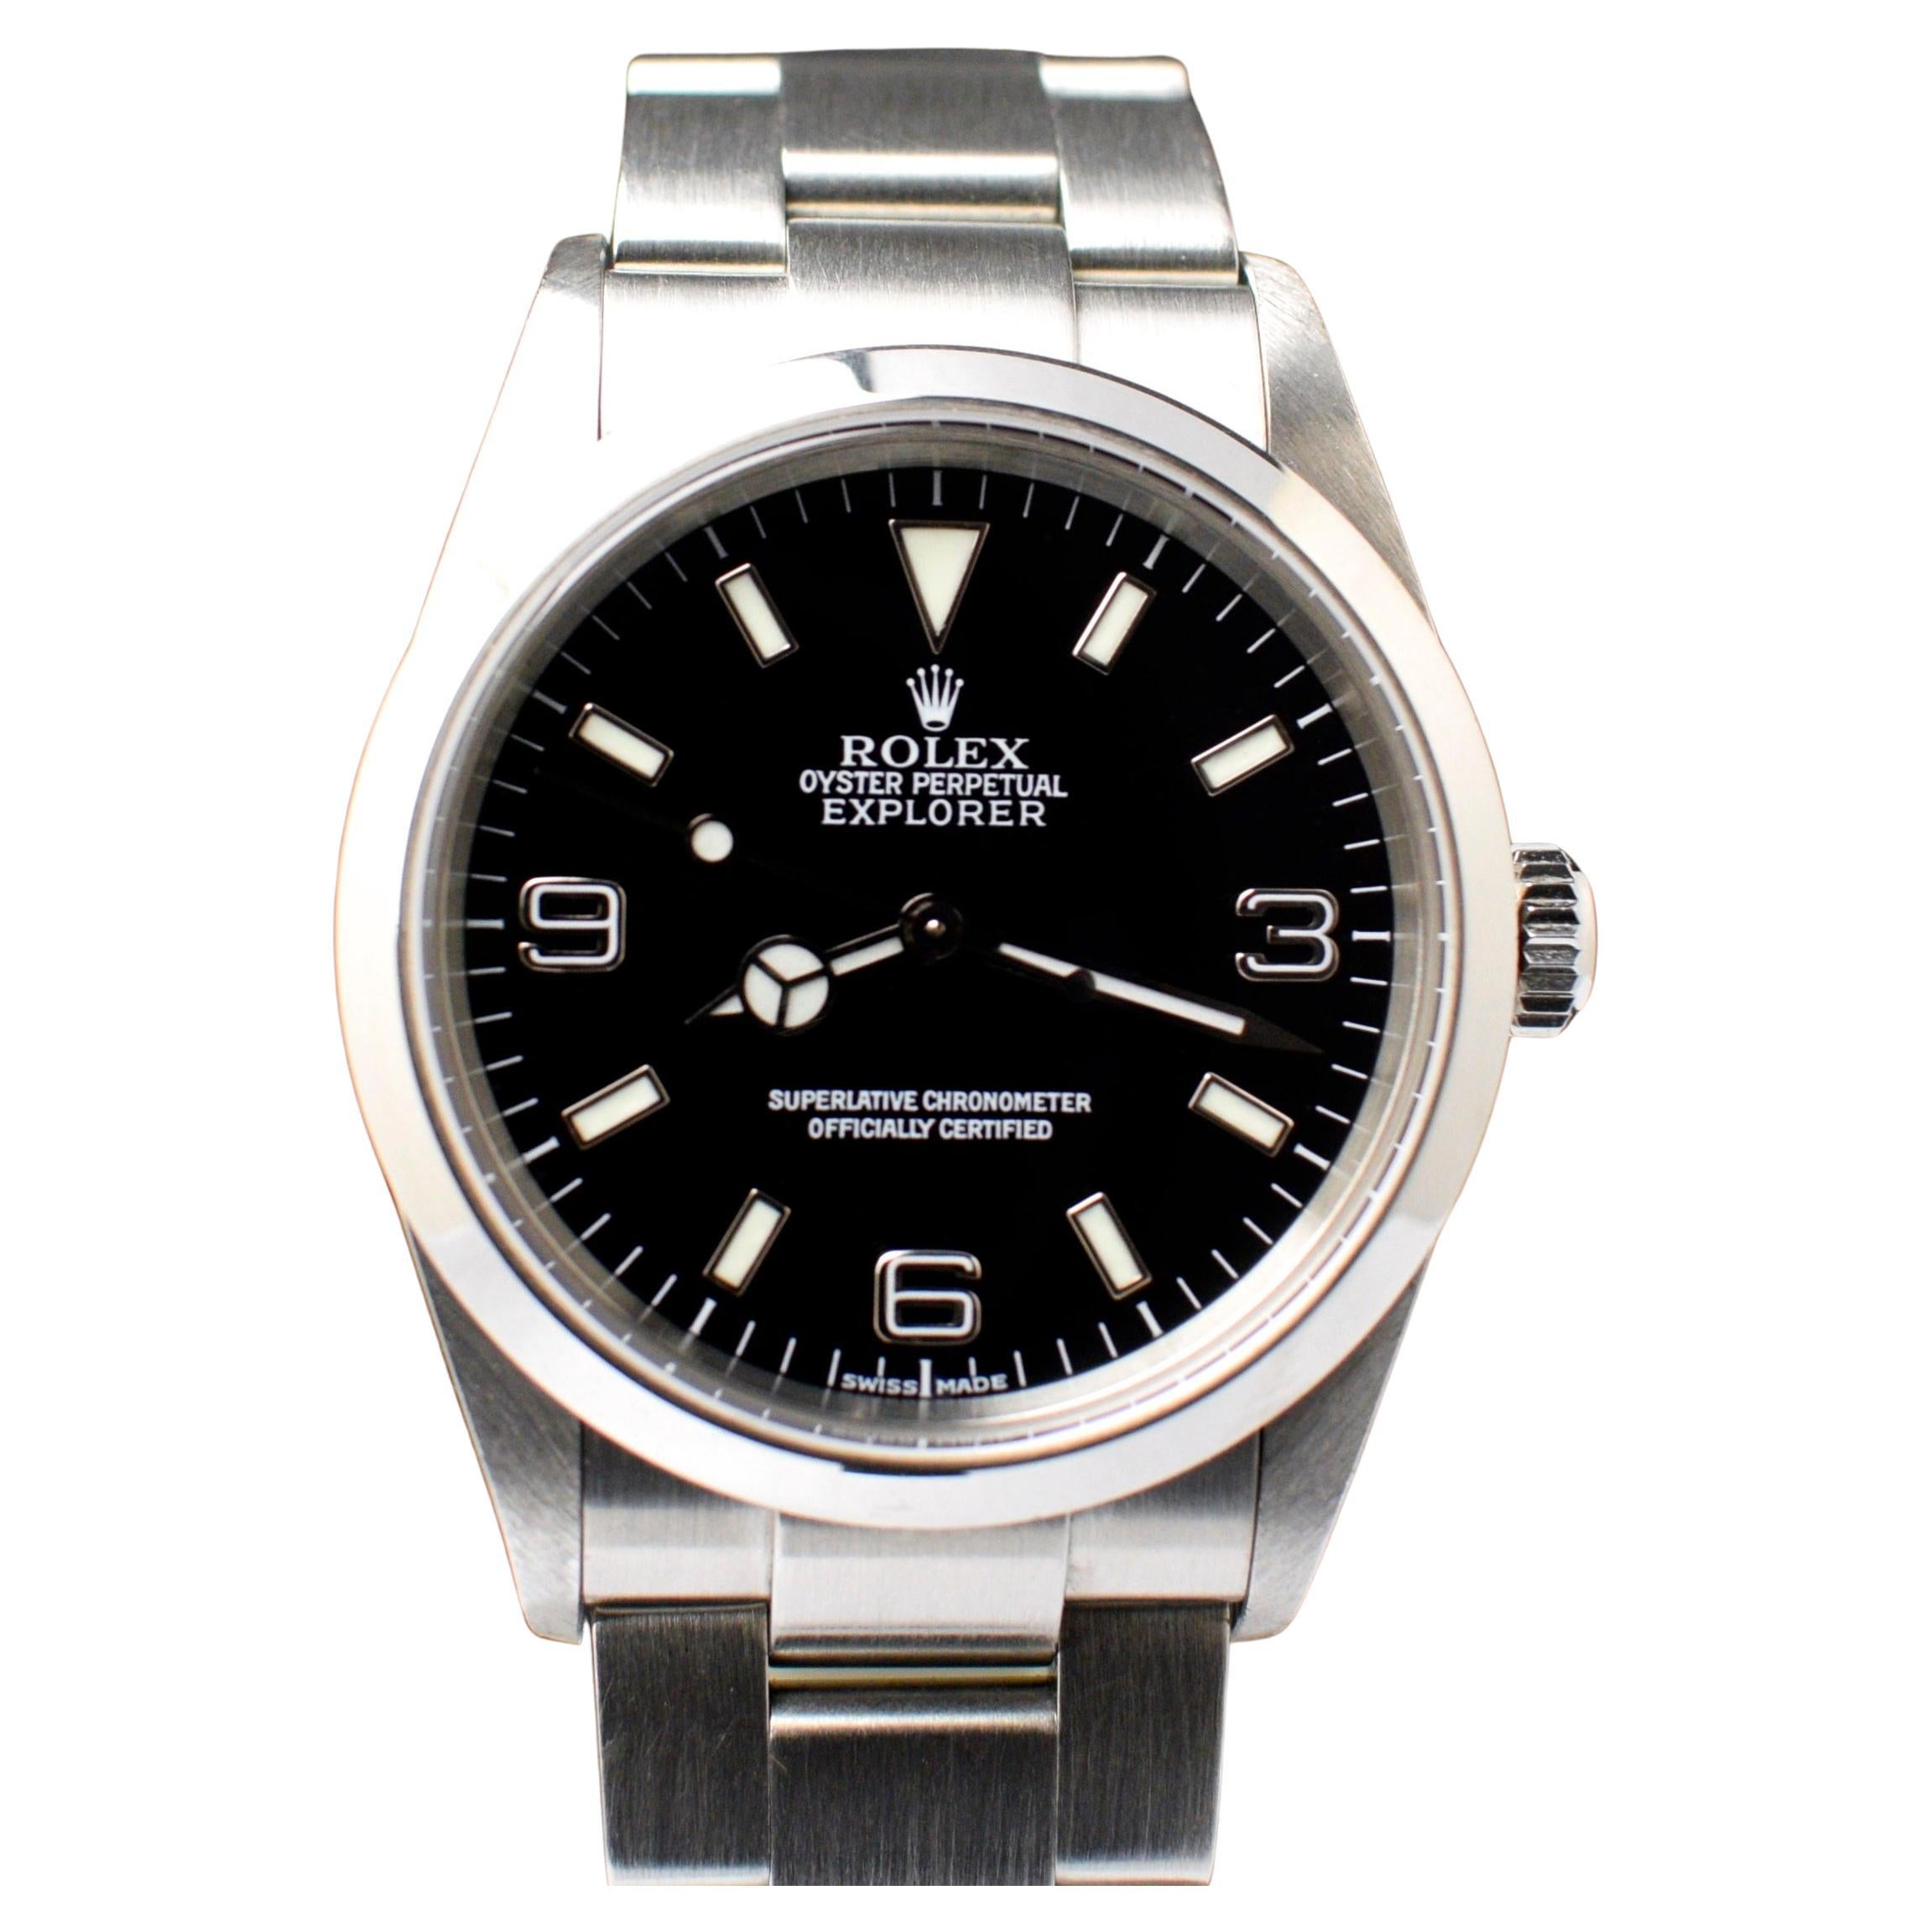 How often does a Rolex need to be serviced?